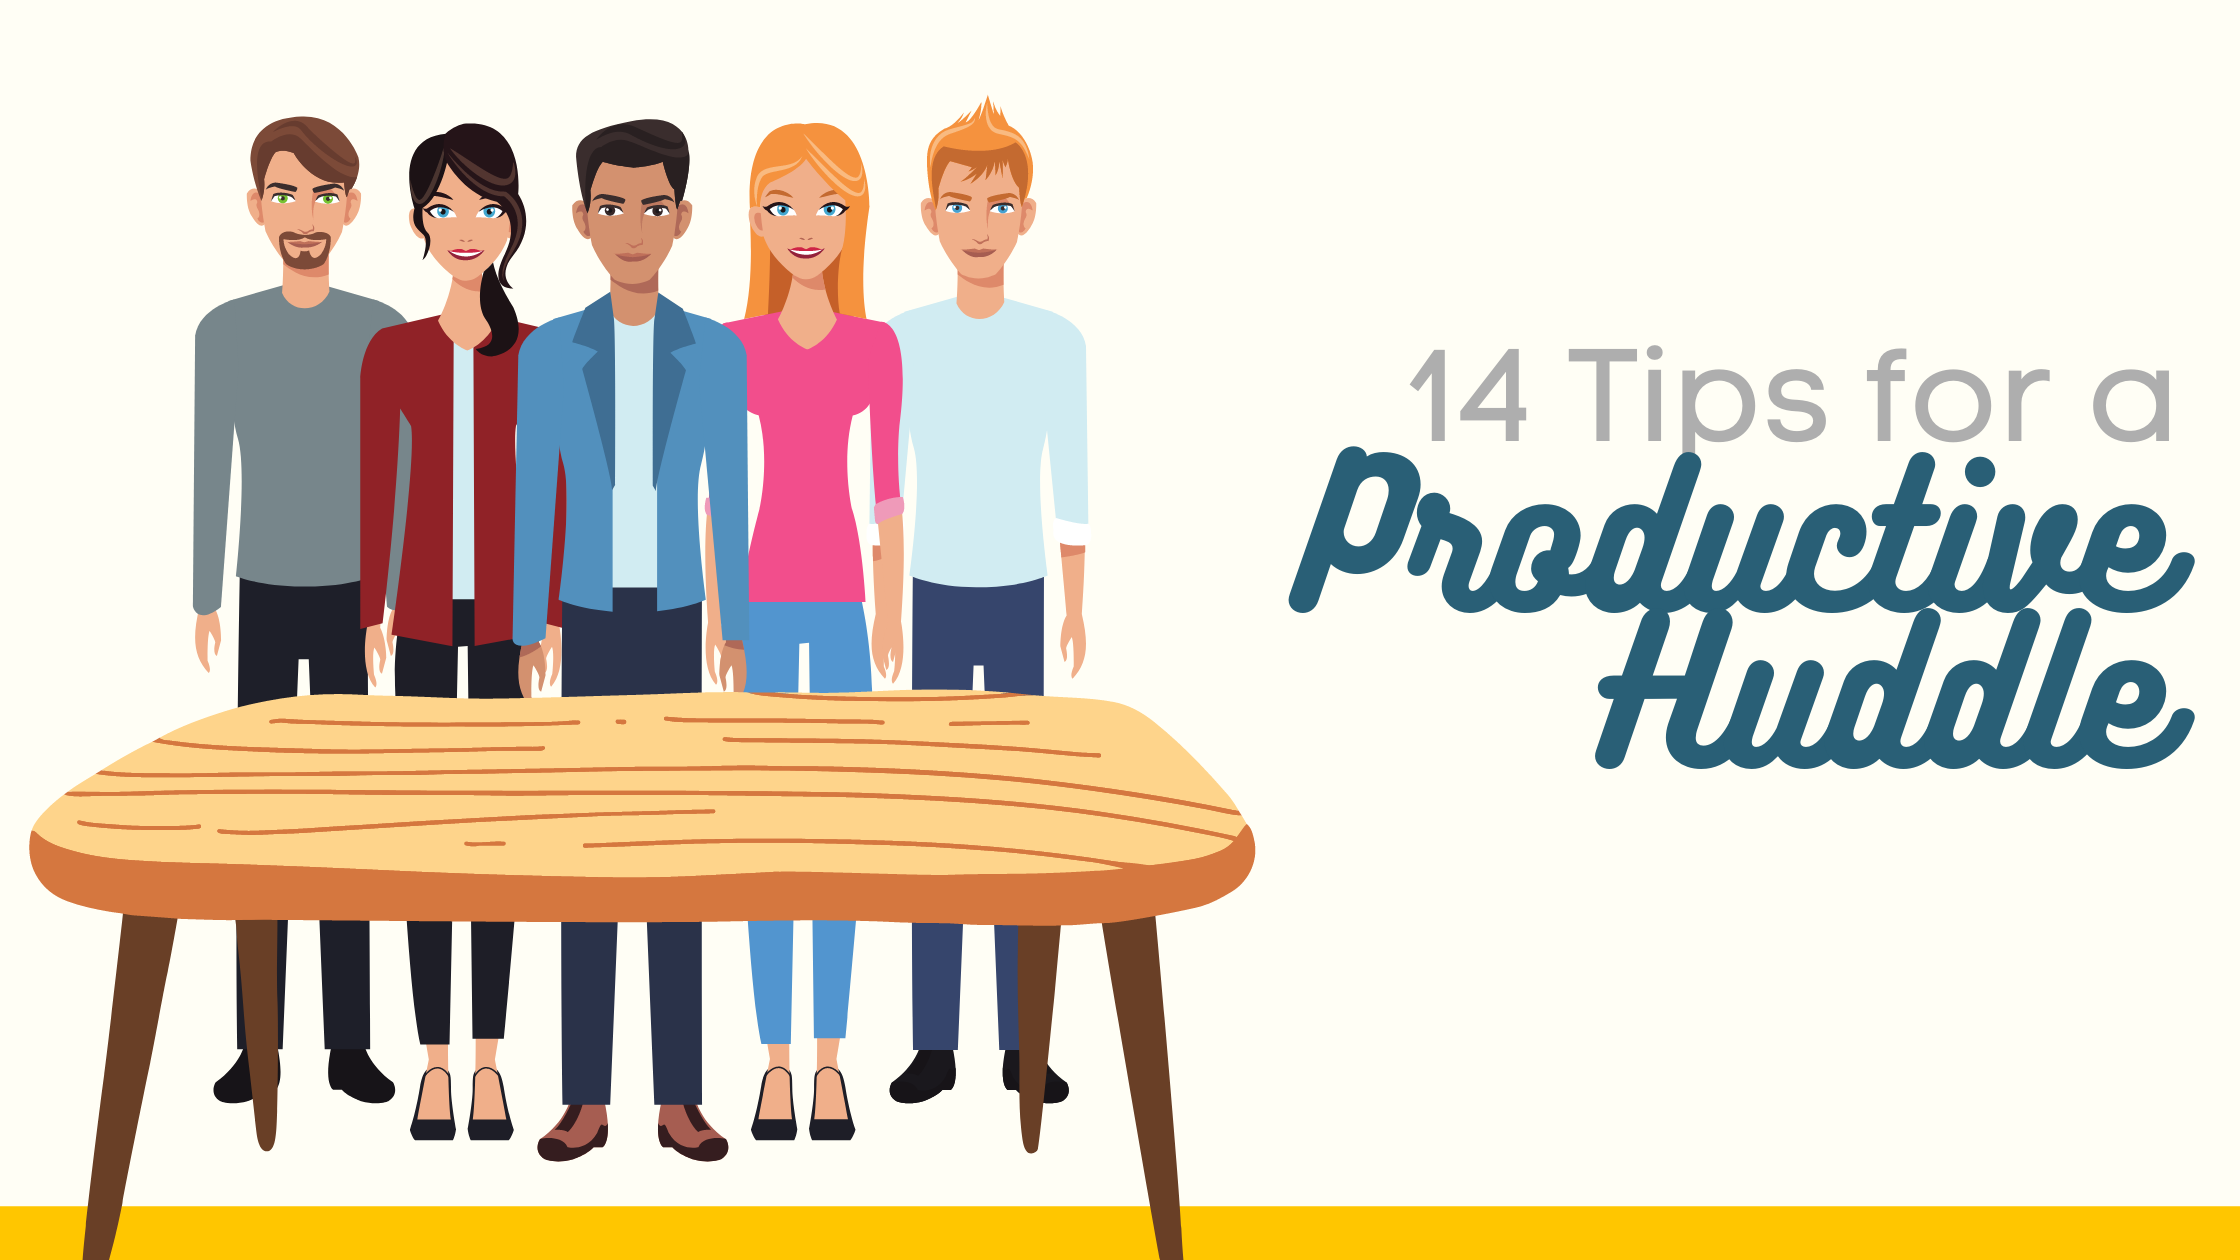 14 Tips for a Productive Huddle